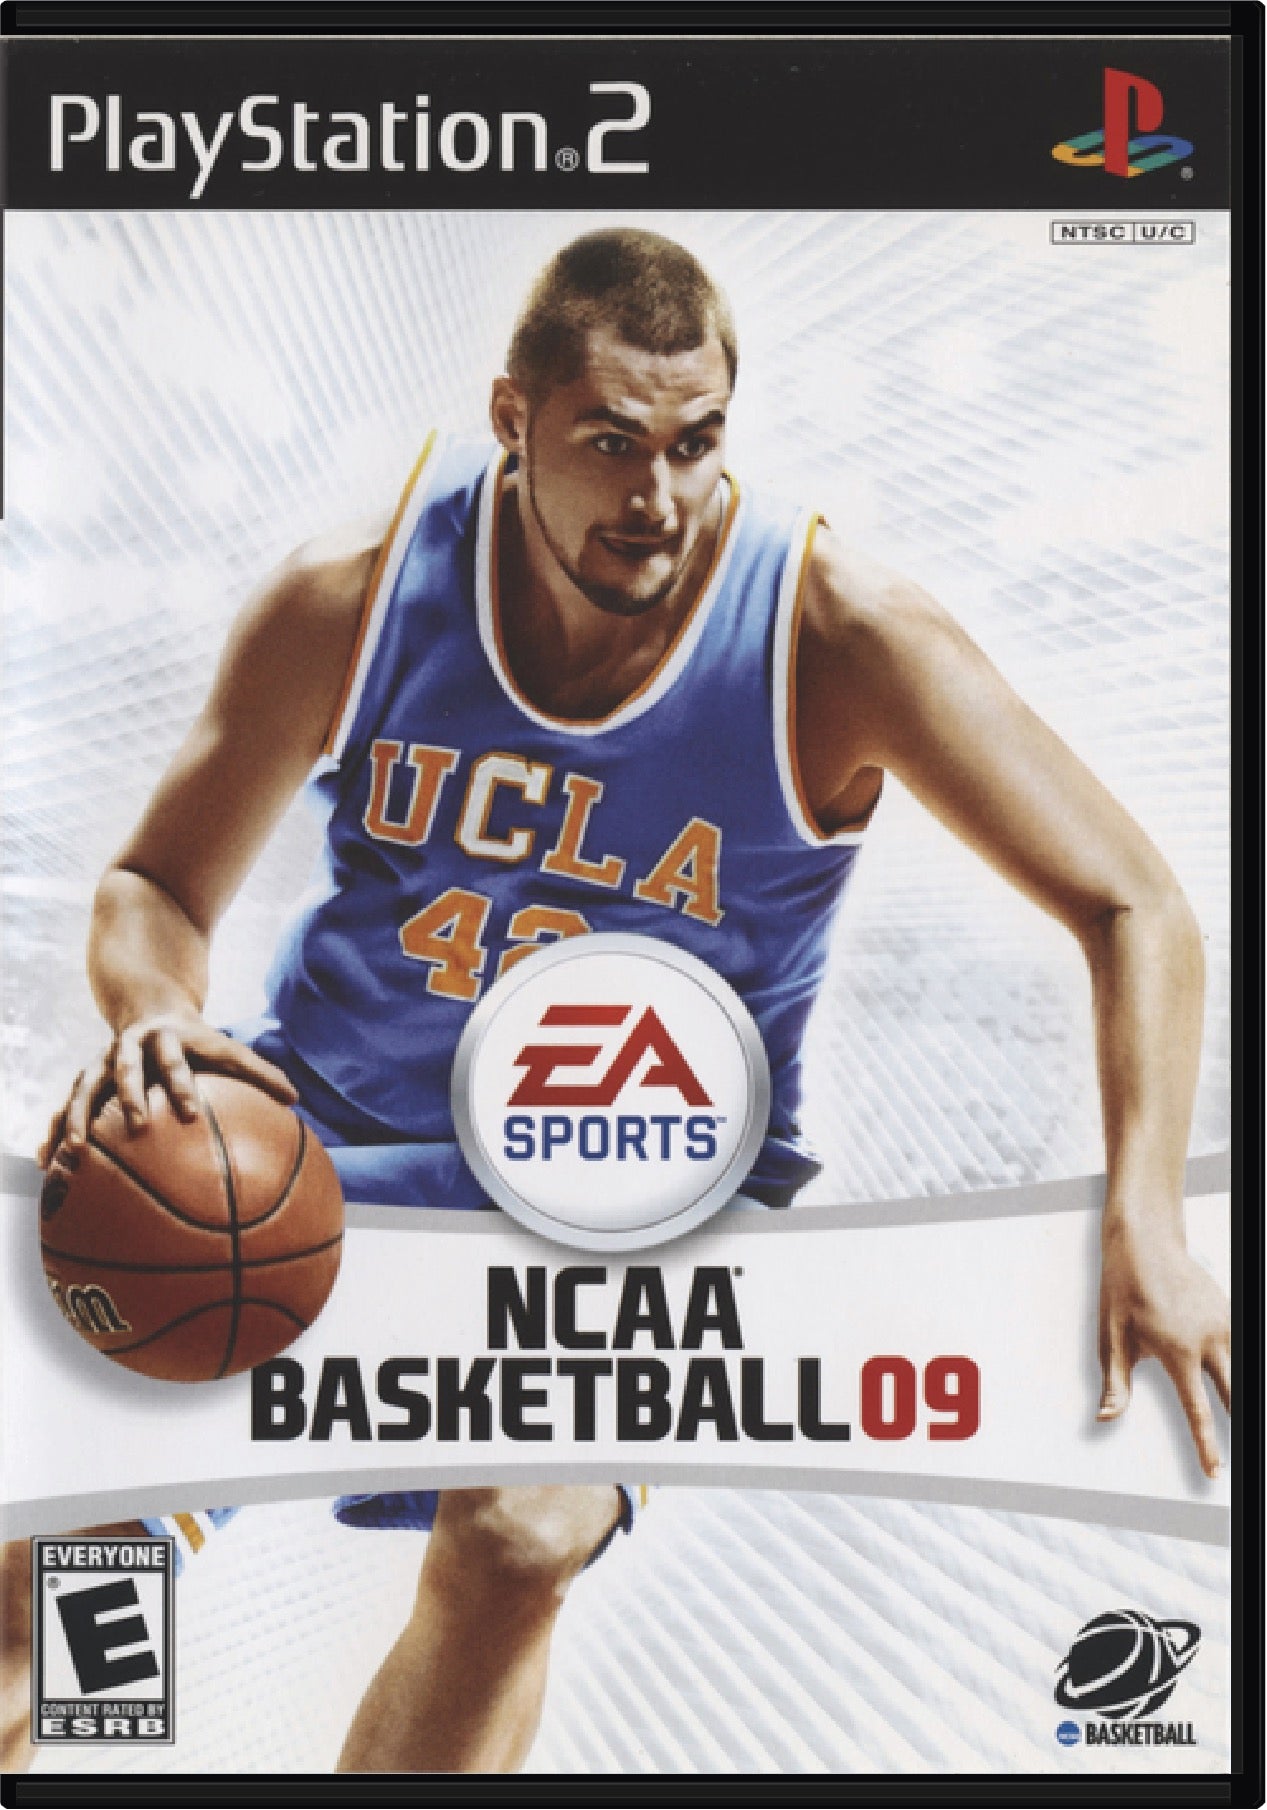 NCAA Basketball 09 Cover Art and Product Photo